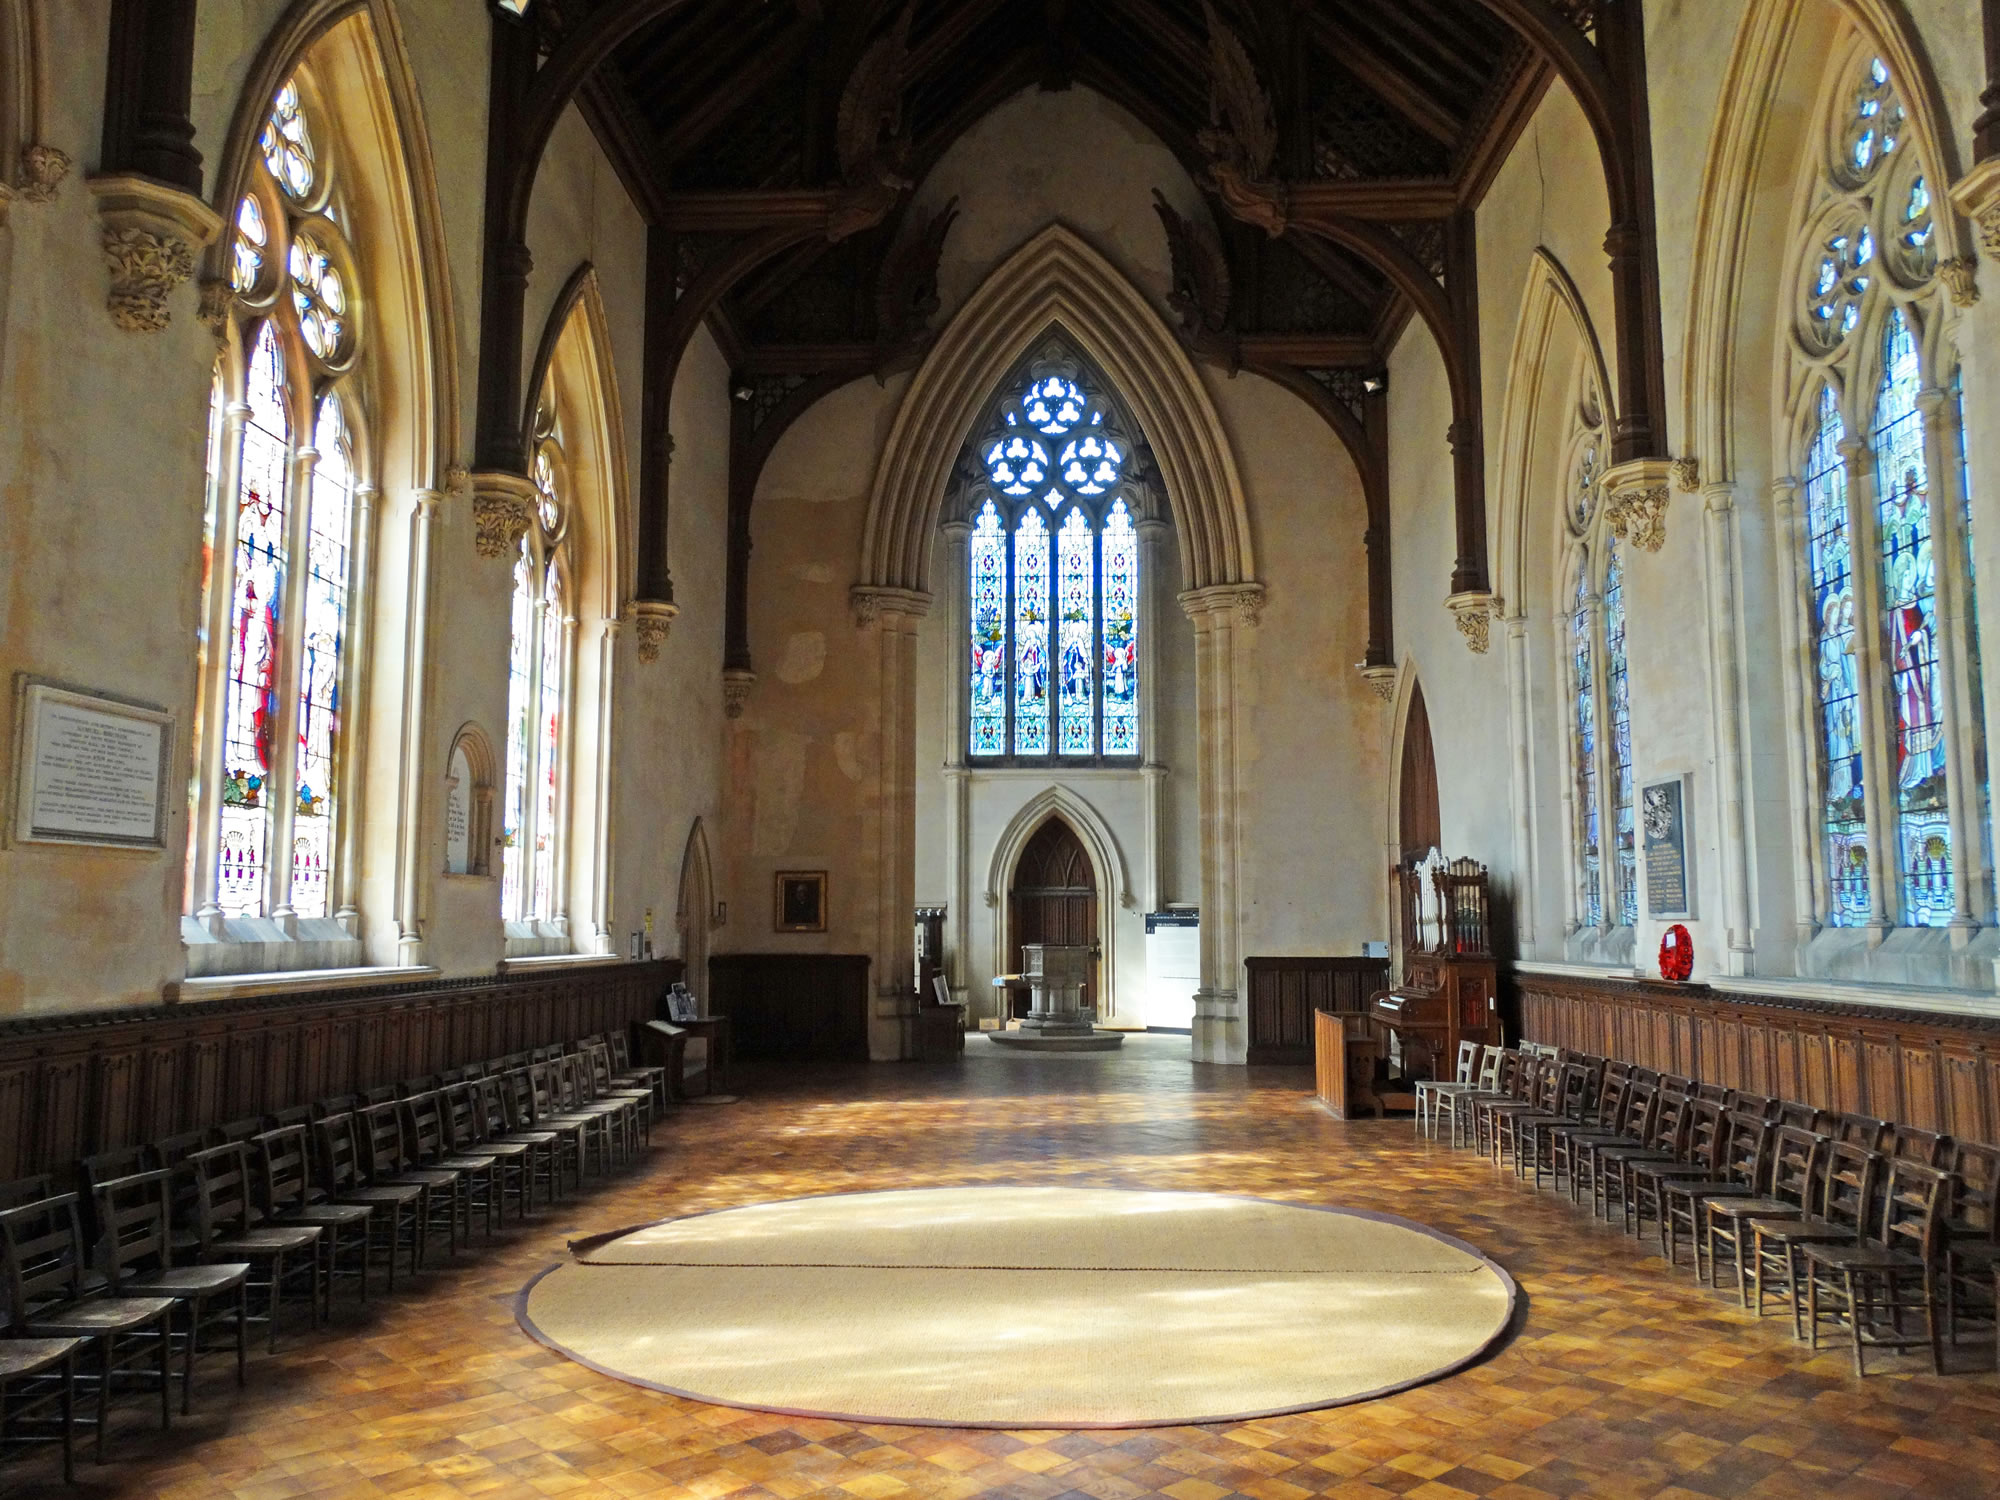 Norfolk Churches, including ancient medieval Norfolk Church Cathedral